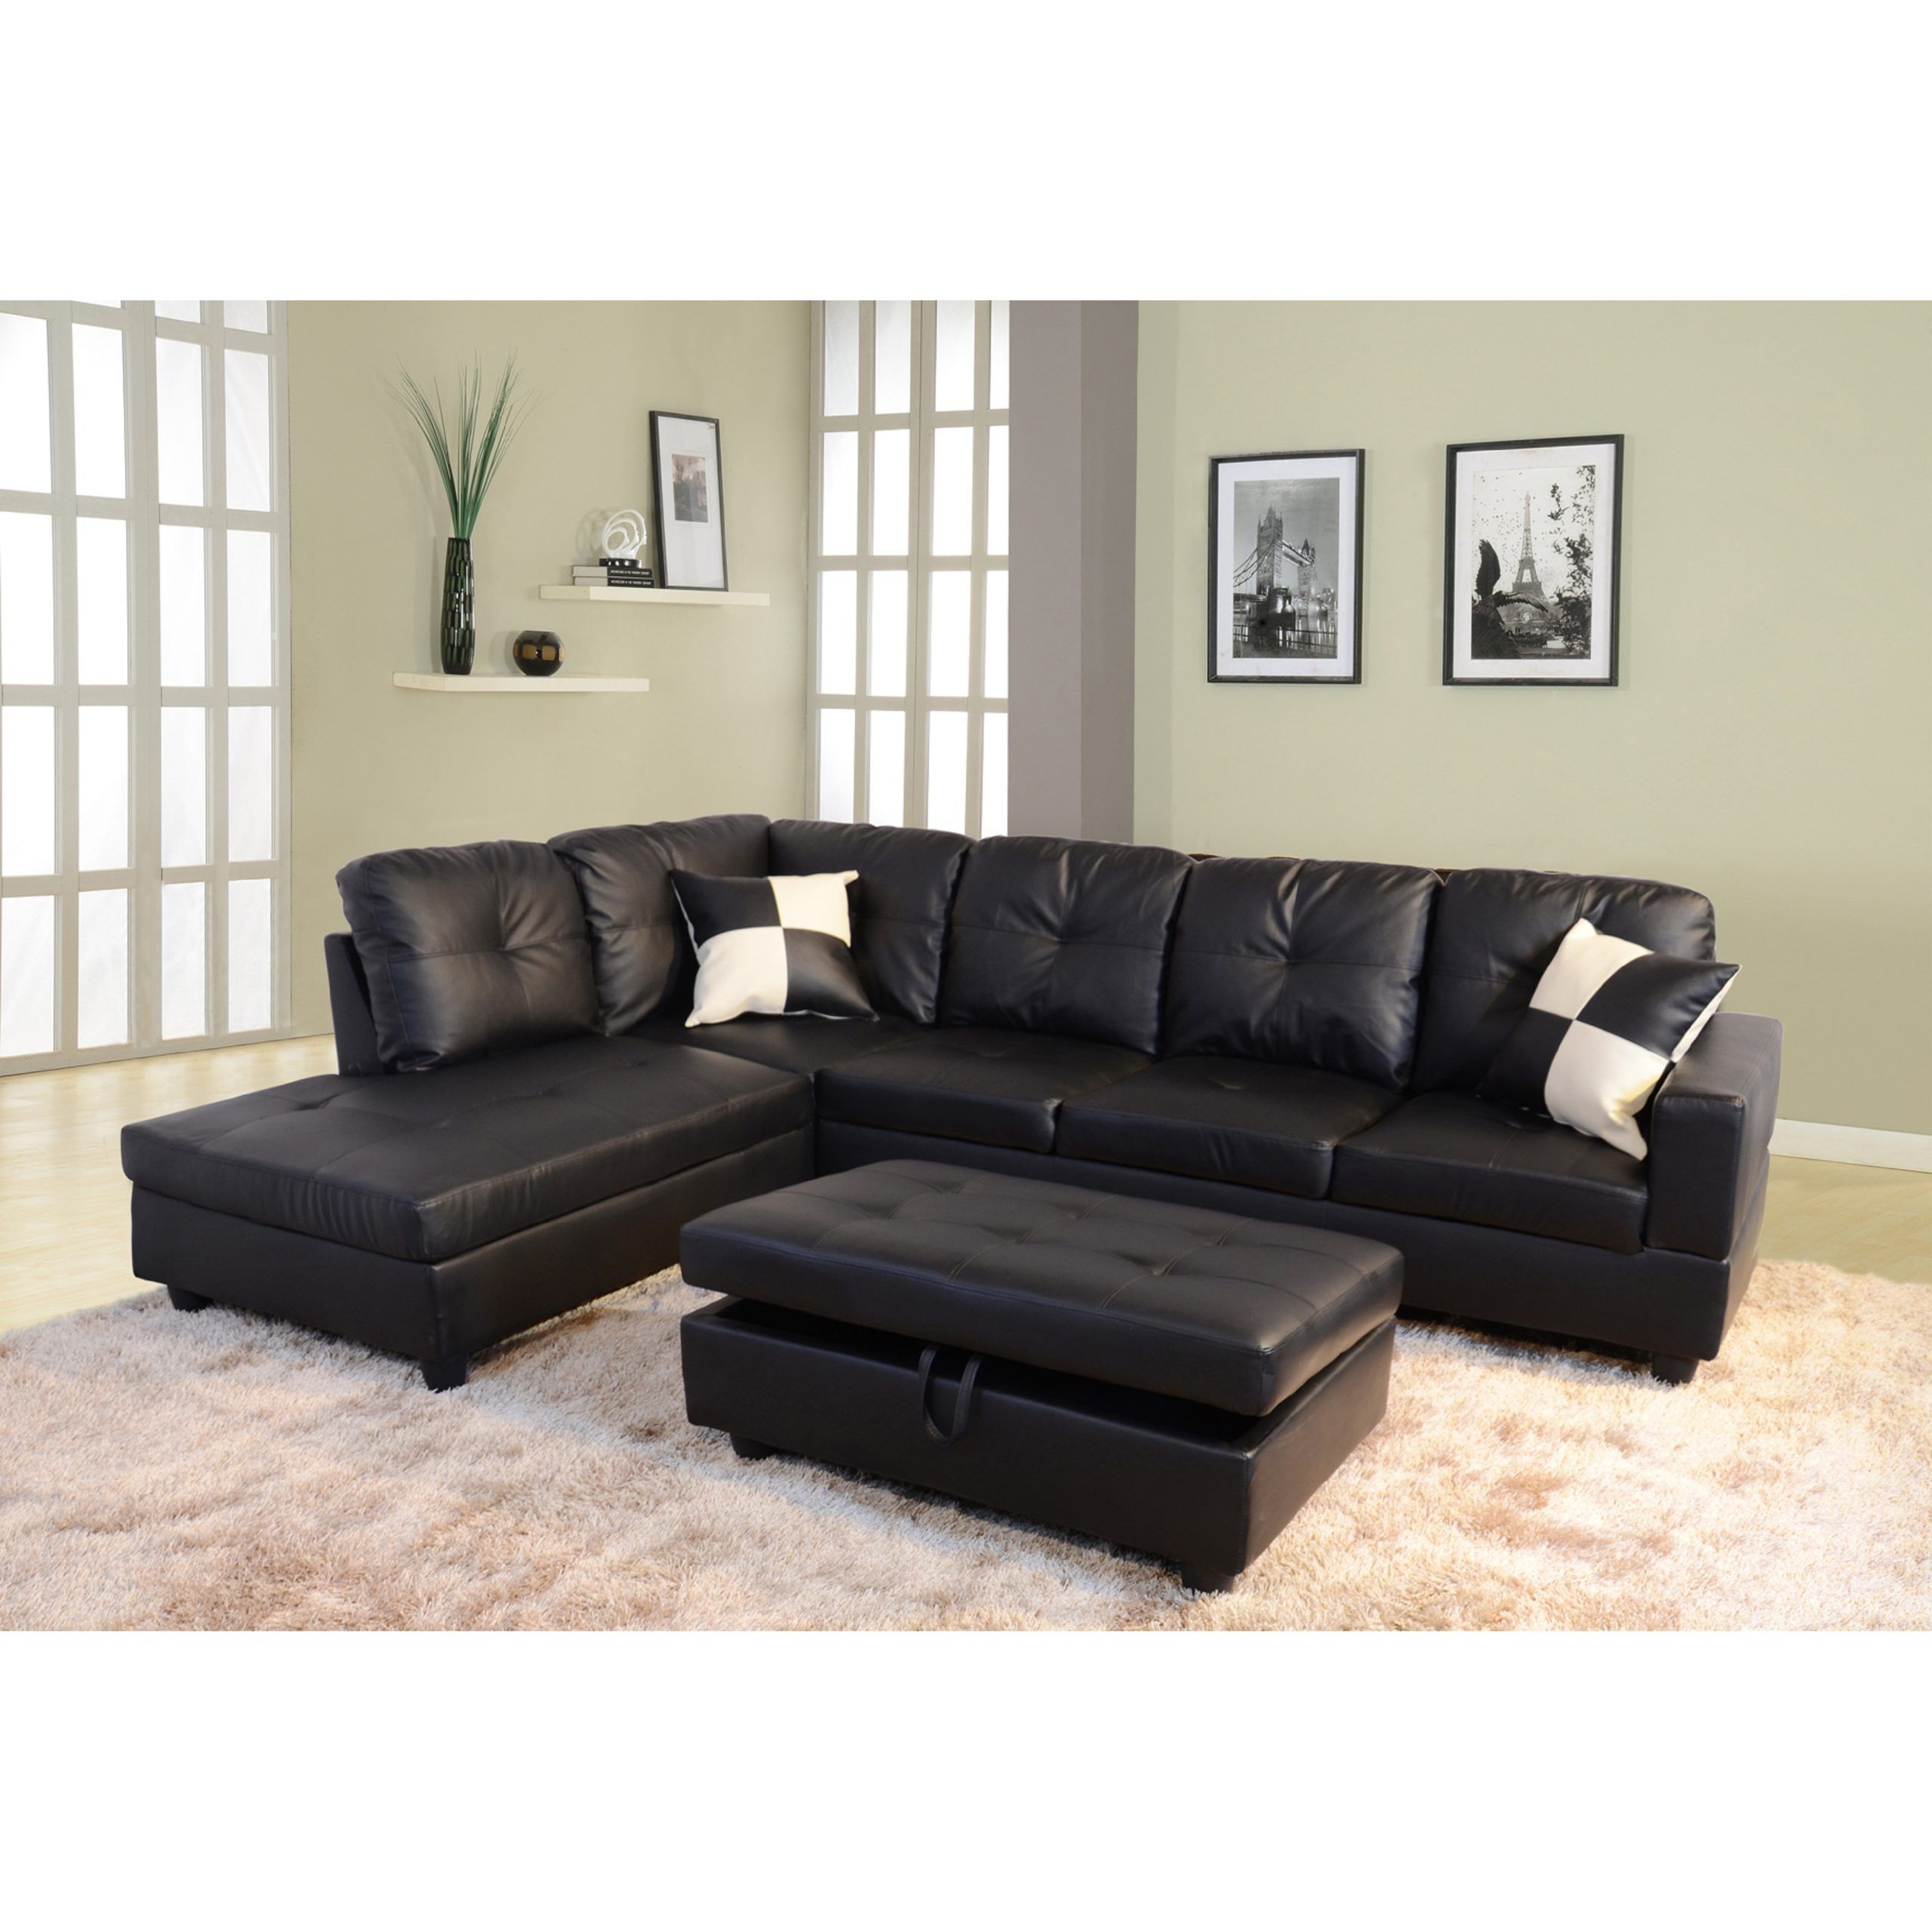 3 Pieces Sectional Sofa Set,Left Facing Black(091A) – On Sale – Bed Bath &  Beyond – 33560697 Inside 3 Piece Leather Sectional Sofa Sets (View 7 of 15)